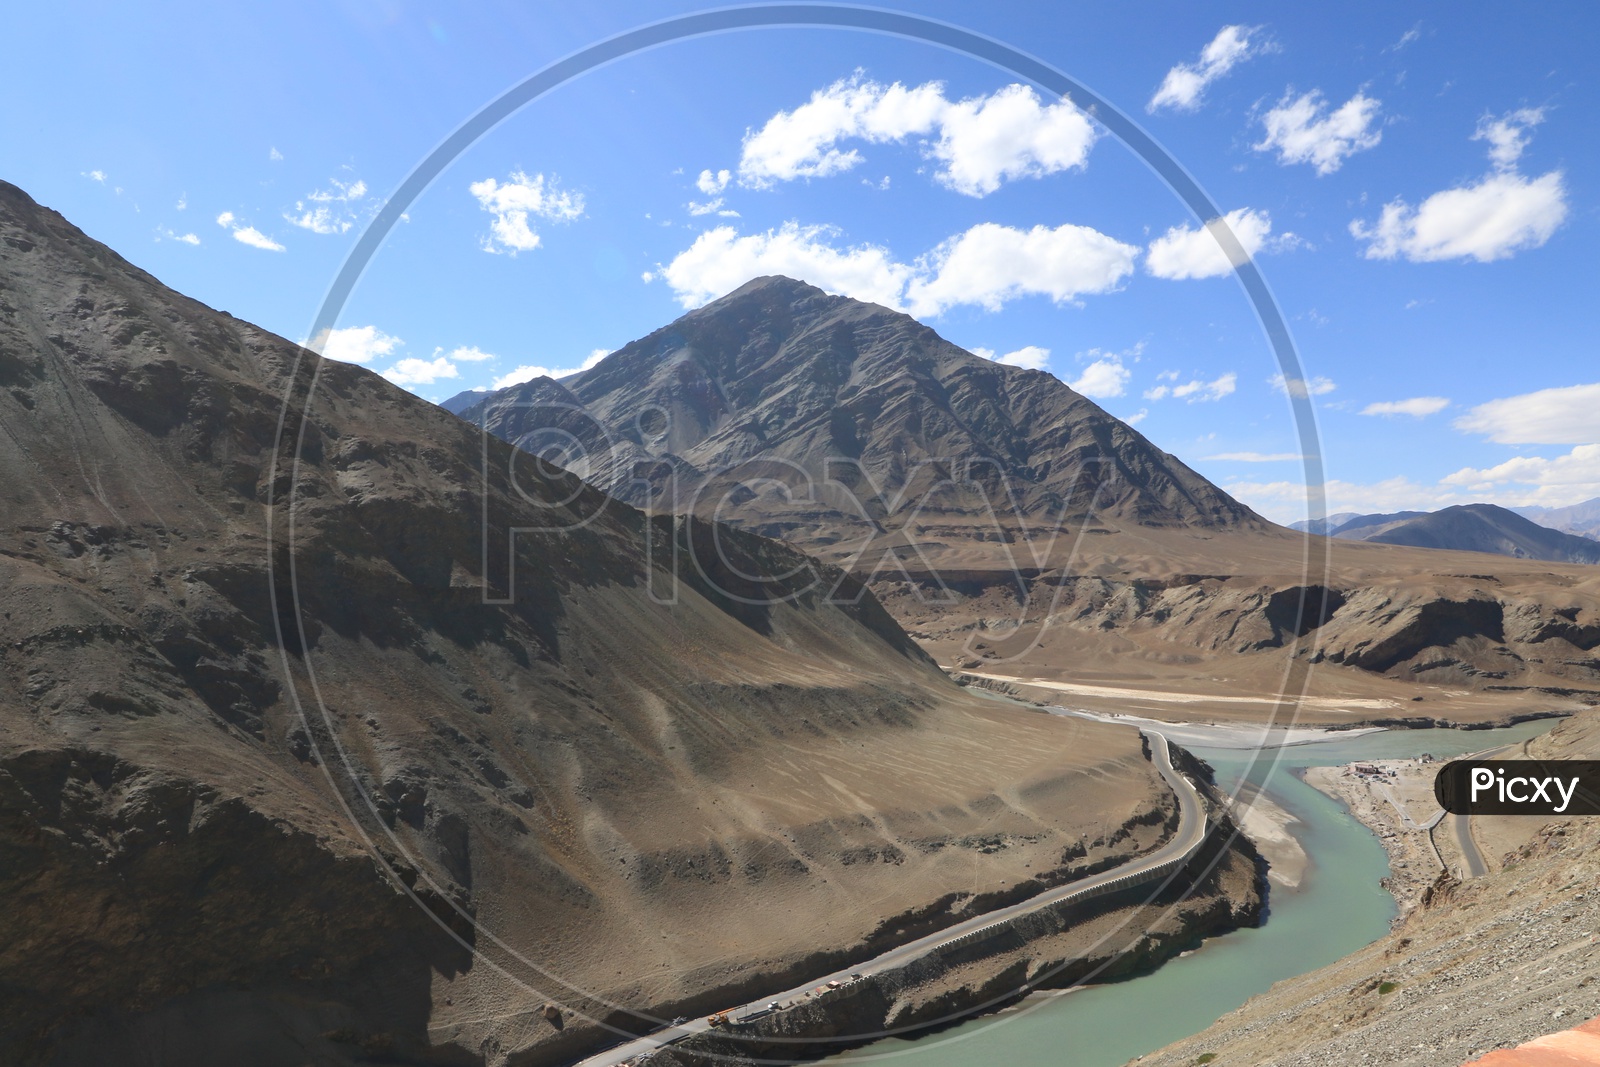 Mountains of leh with water flow in the foreground